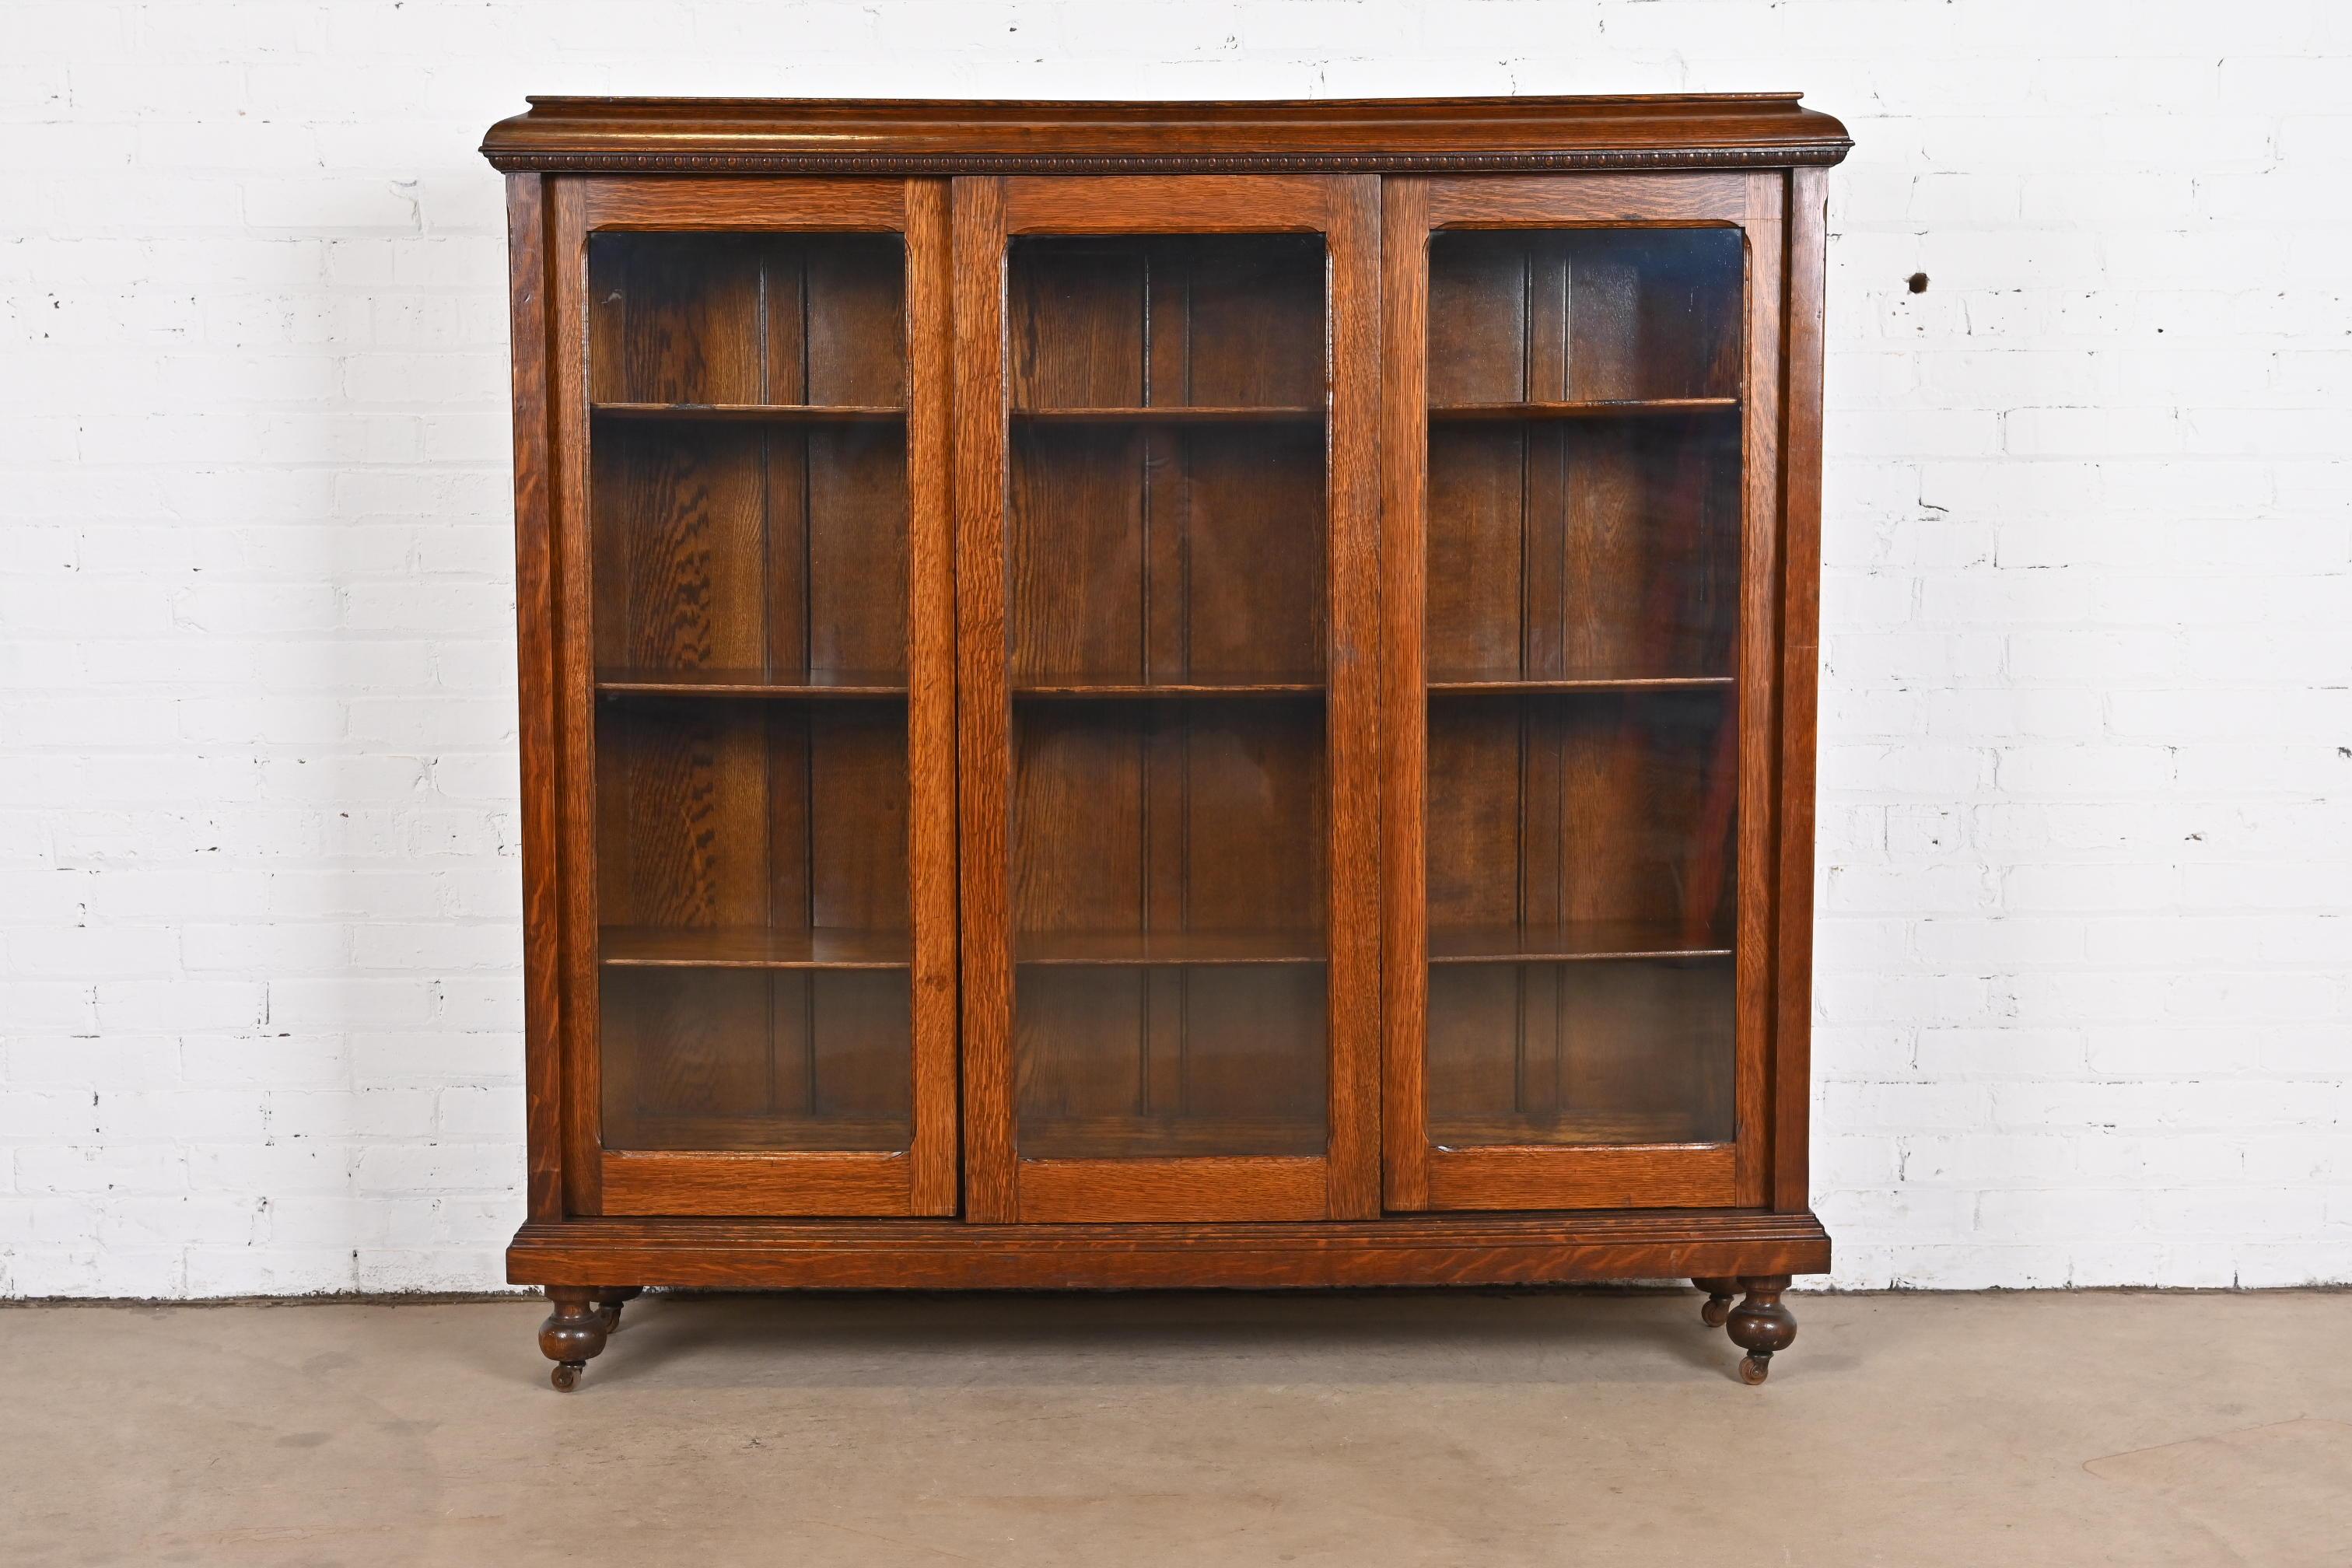 A beautiful antique Arts & Crafts triple bookcase cabinet

In the manner of Stickley

USA, circa 1900

Carved oak, with sliding glass front doors.

Measures: 57